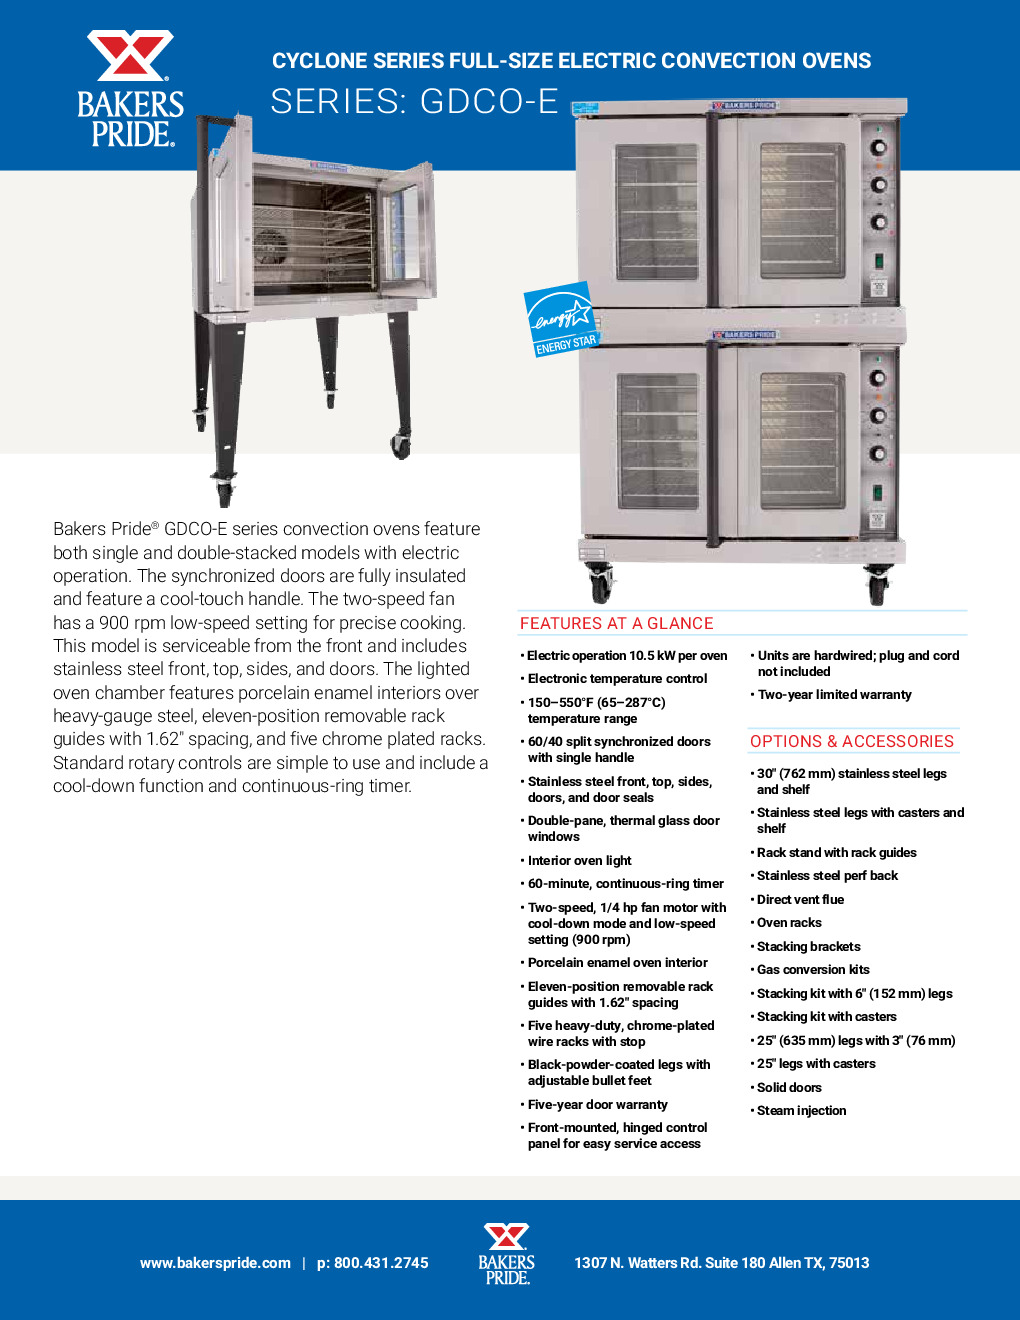 Bakers Pride GDCO-E1 Electric Convection Oven